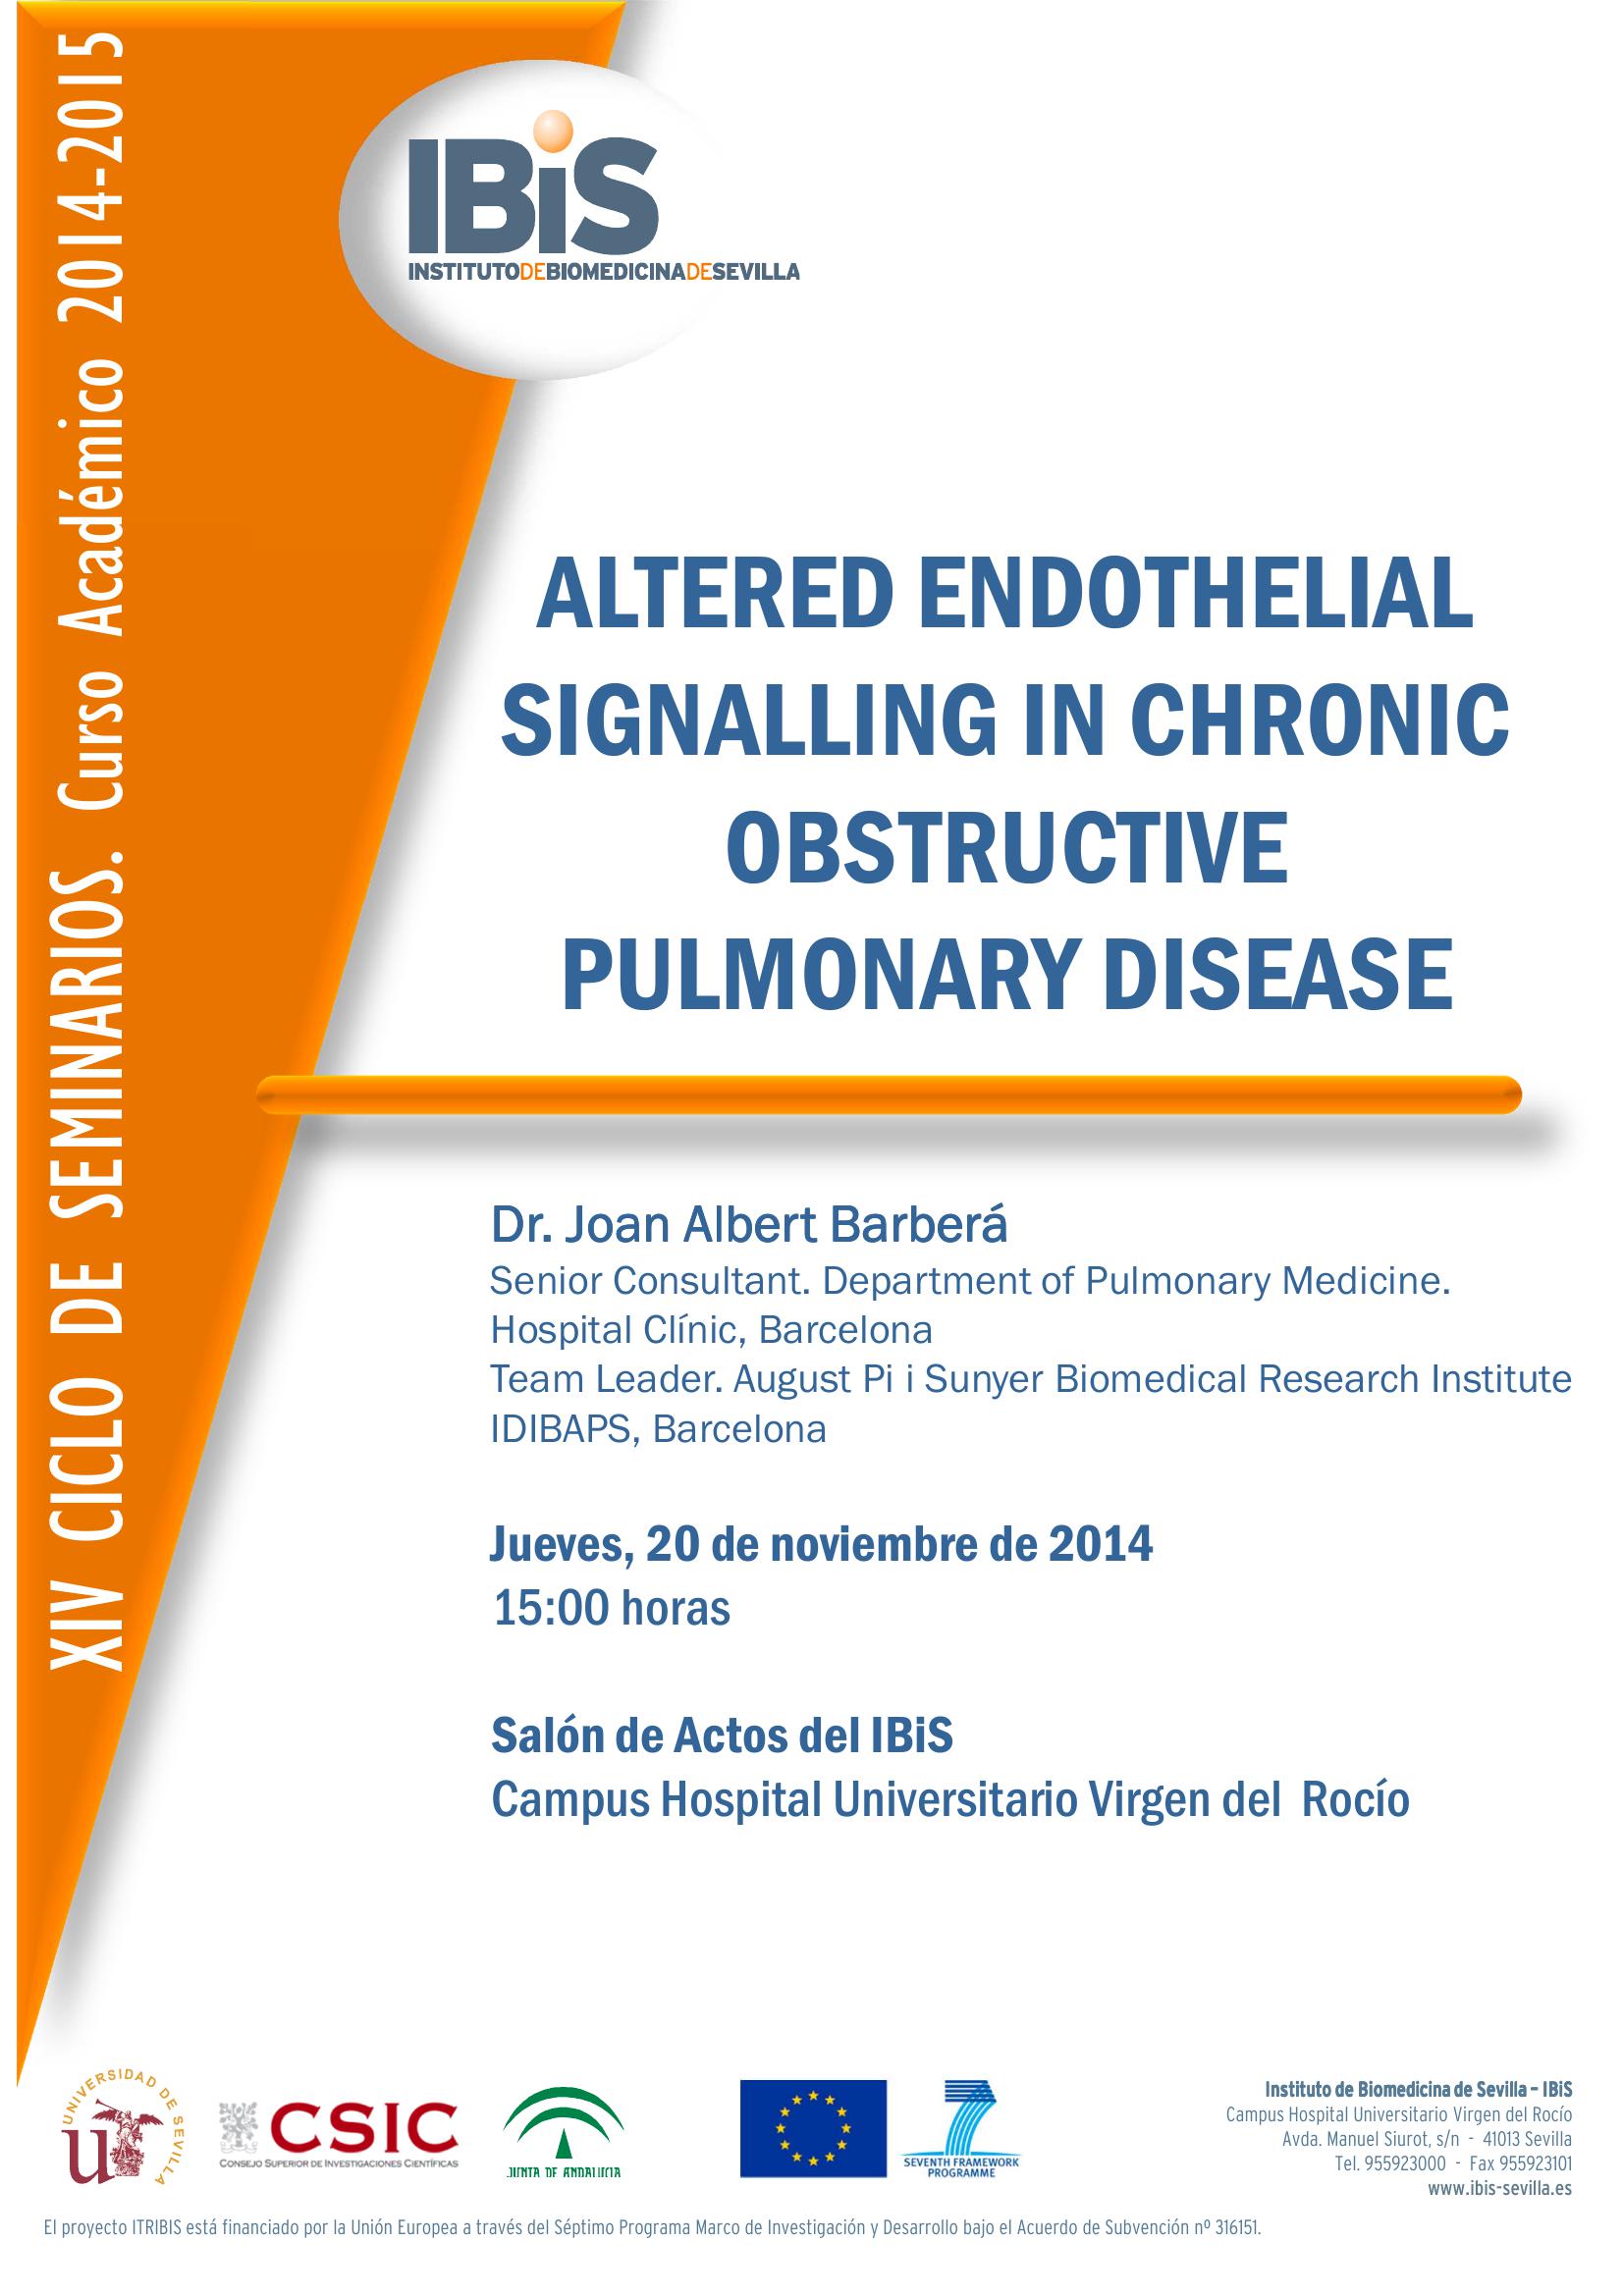 Poster: ALTERED ENDOTHELIAL SIGNALLING IN CHRONIC OBSTRUCTIVE PULMONARY DISEASE